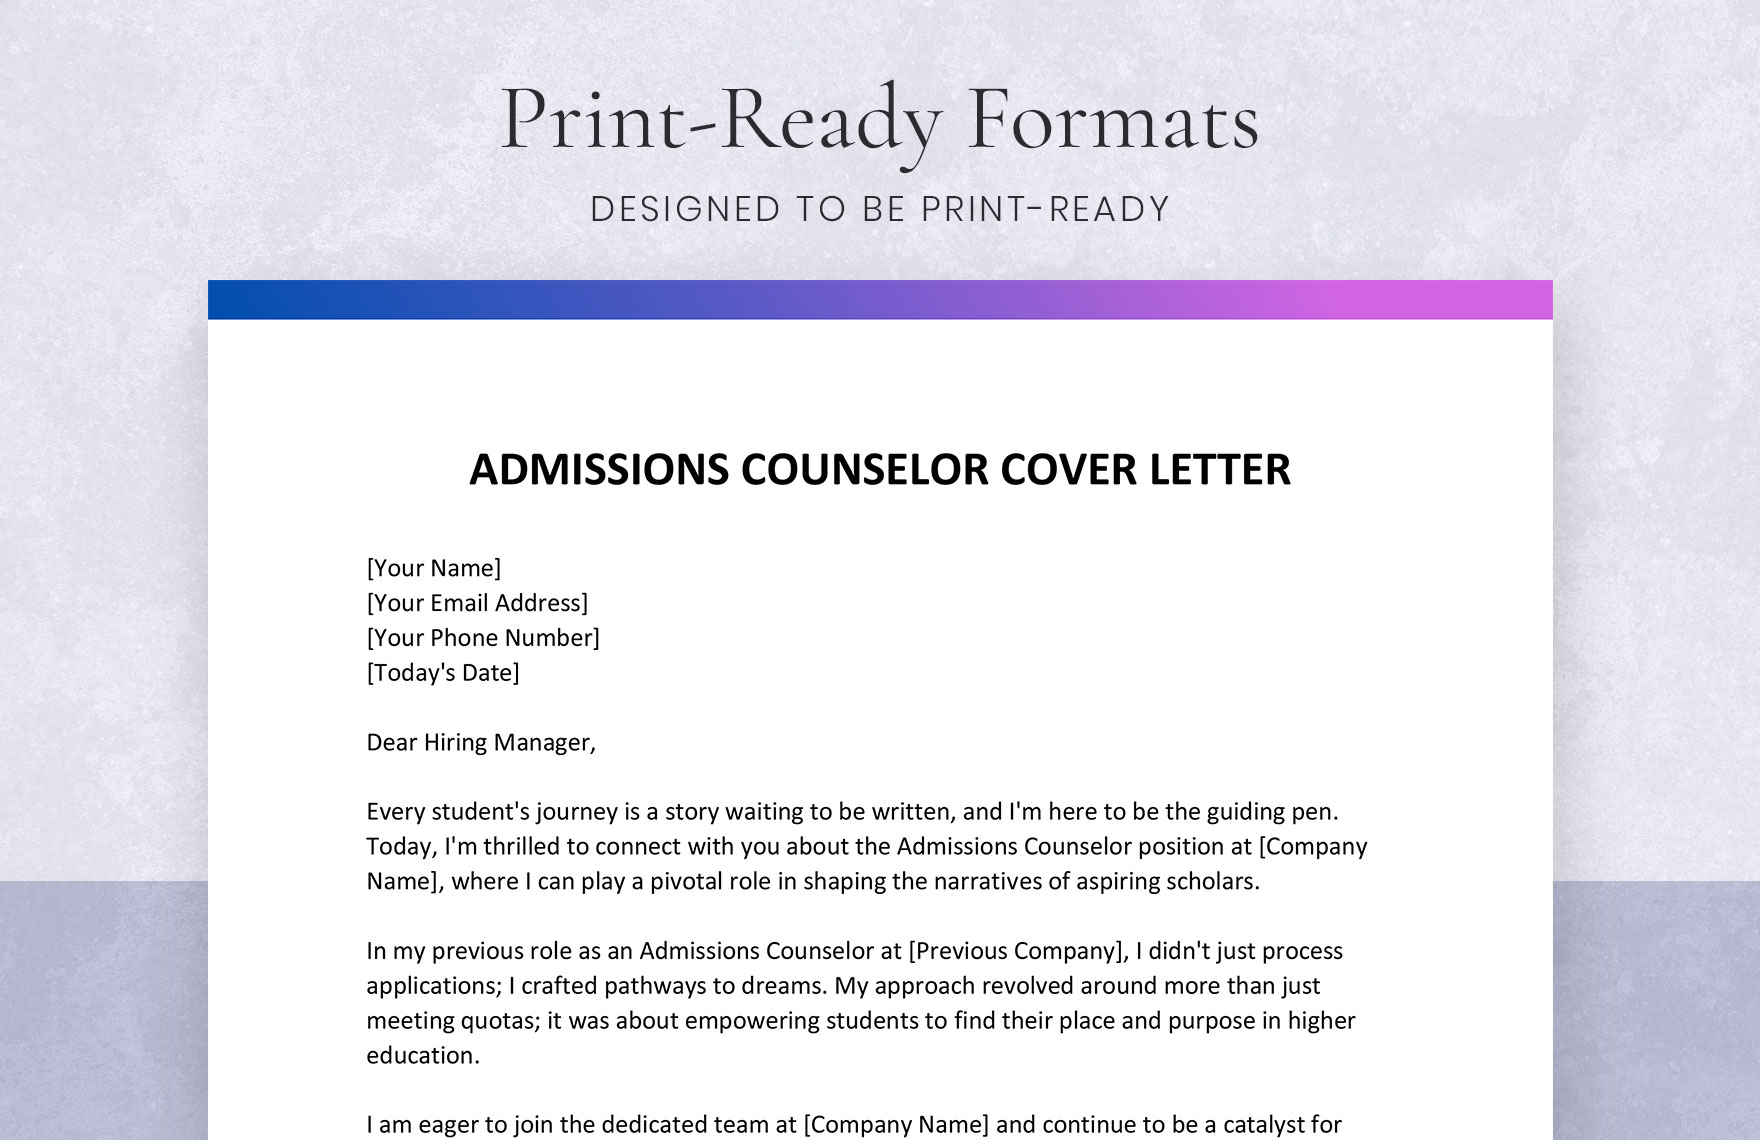 Admissions Counselor Cover Letter